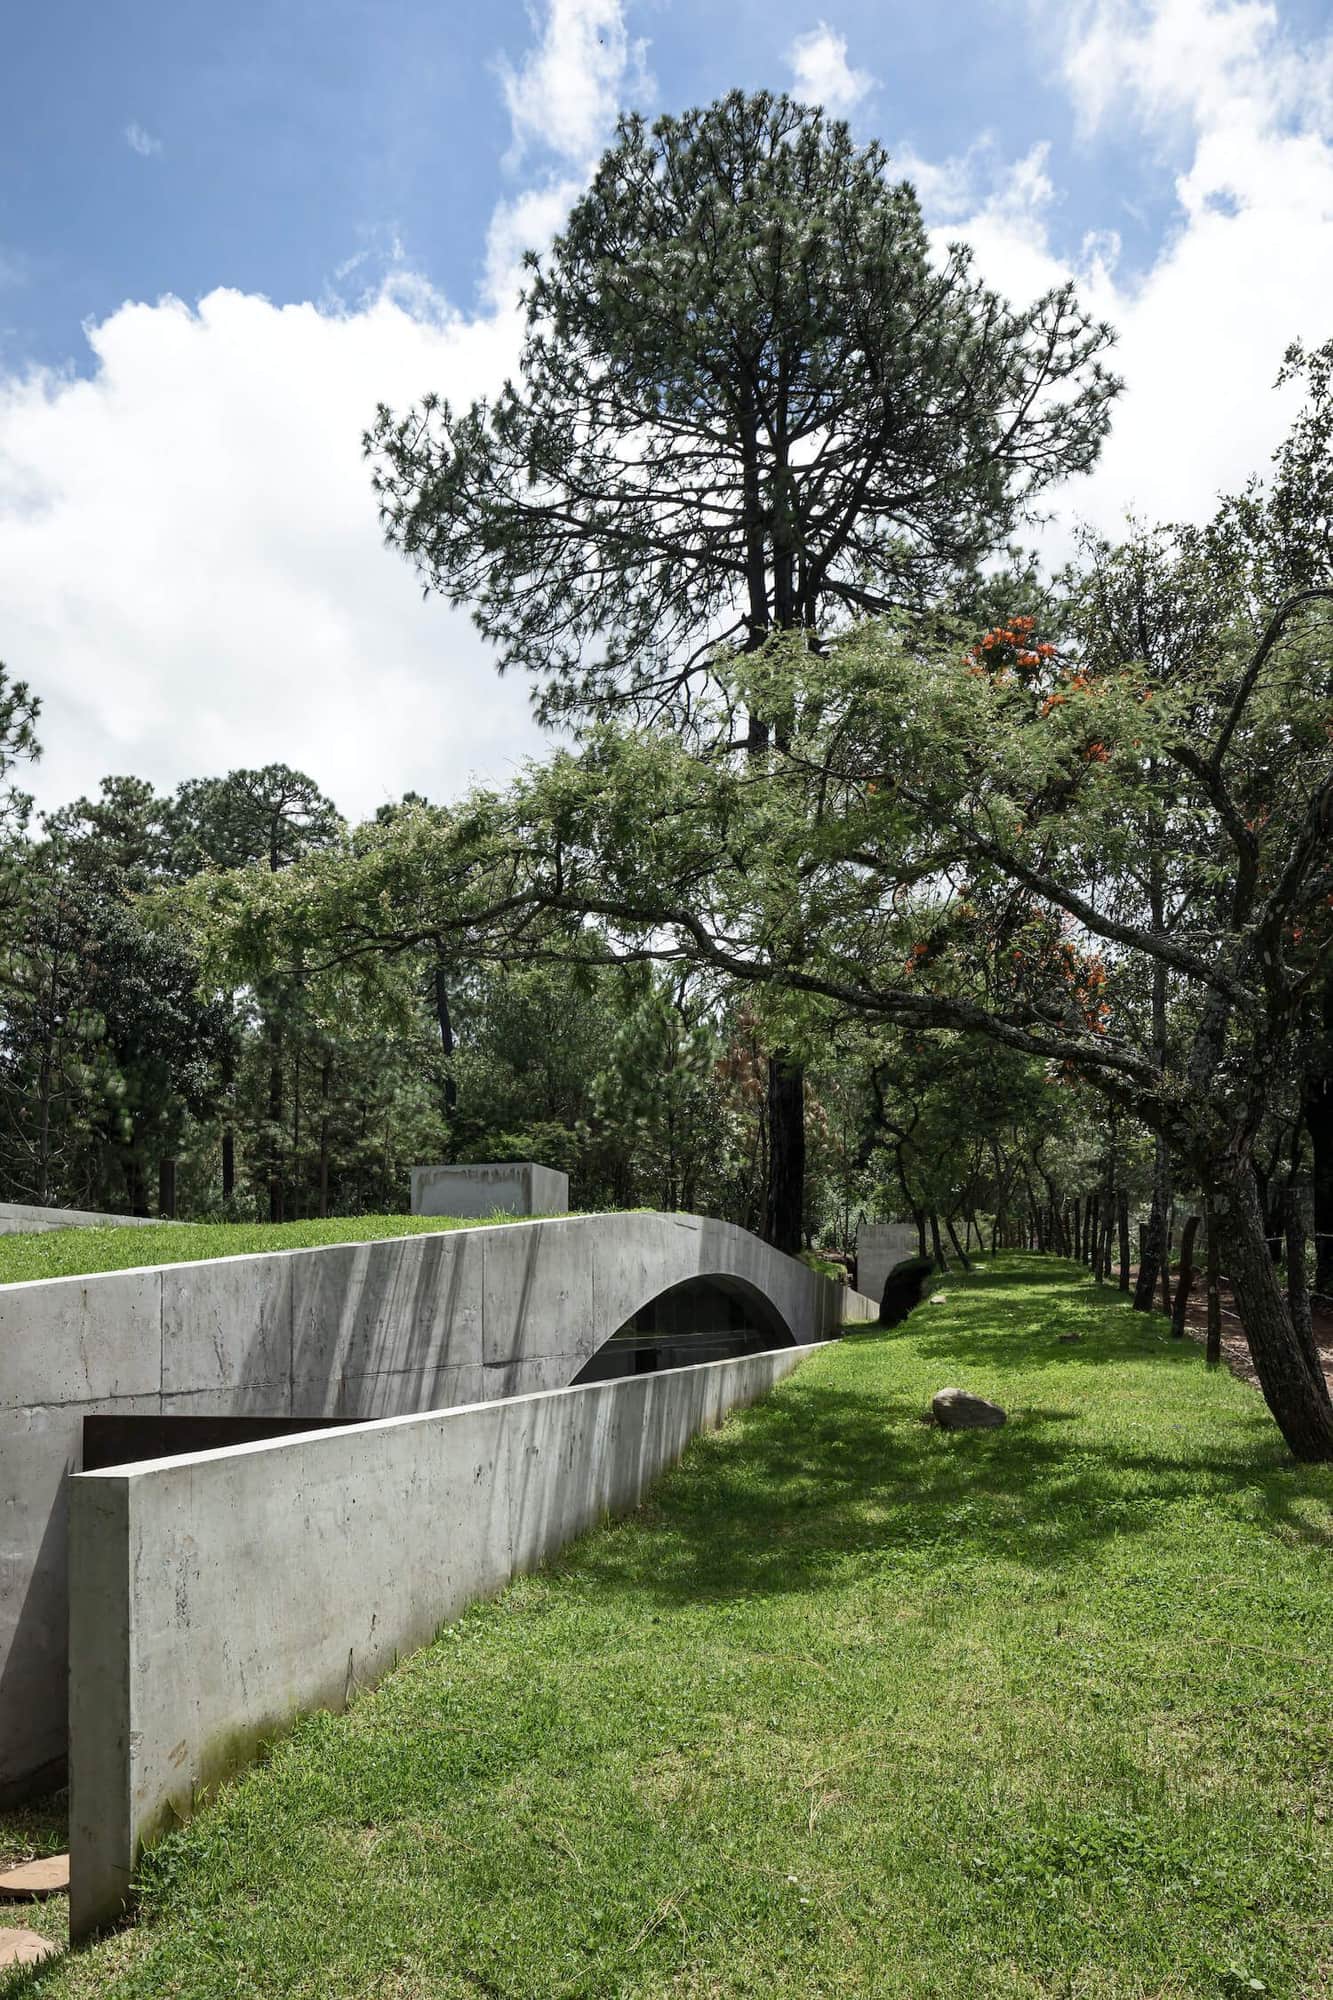 Mexico’s Hidden Hill in Front of the Glen House Recalls a Childlike Innocence